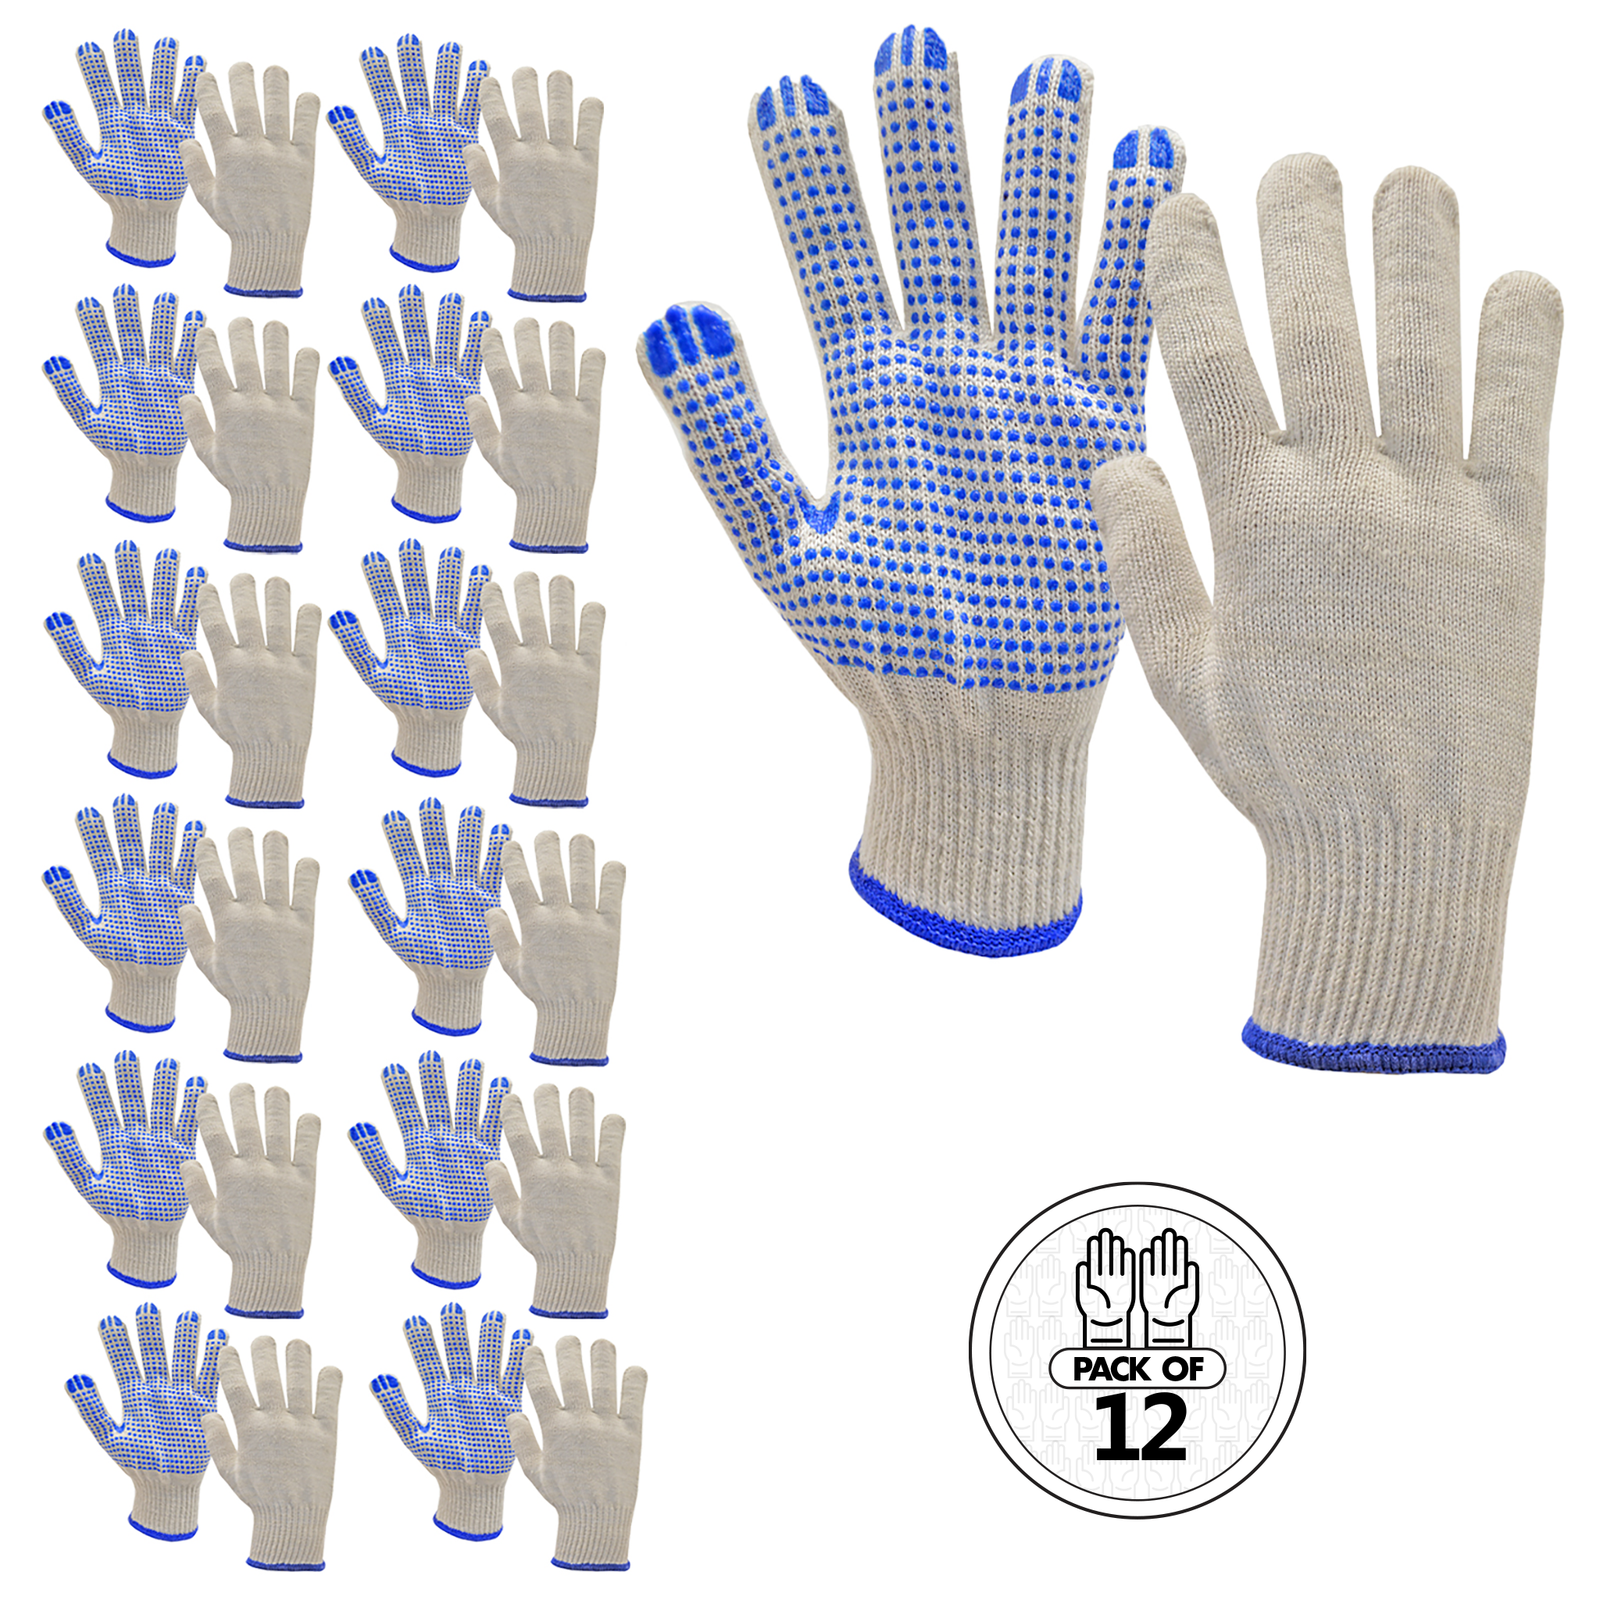 GSAFEME Safety Work Gloves 12 Pairs Cotton with Anti-Slip Grip Dots for  Construction,Warehouse Lifting,House Moving